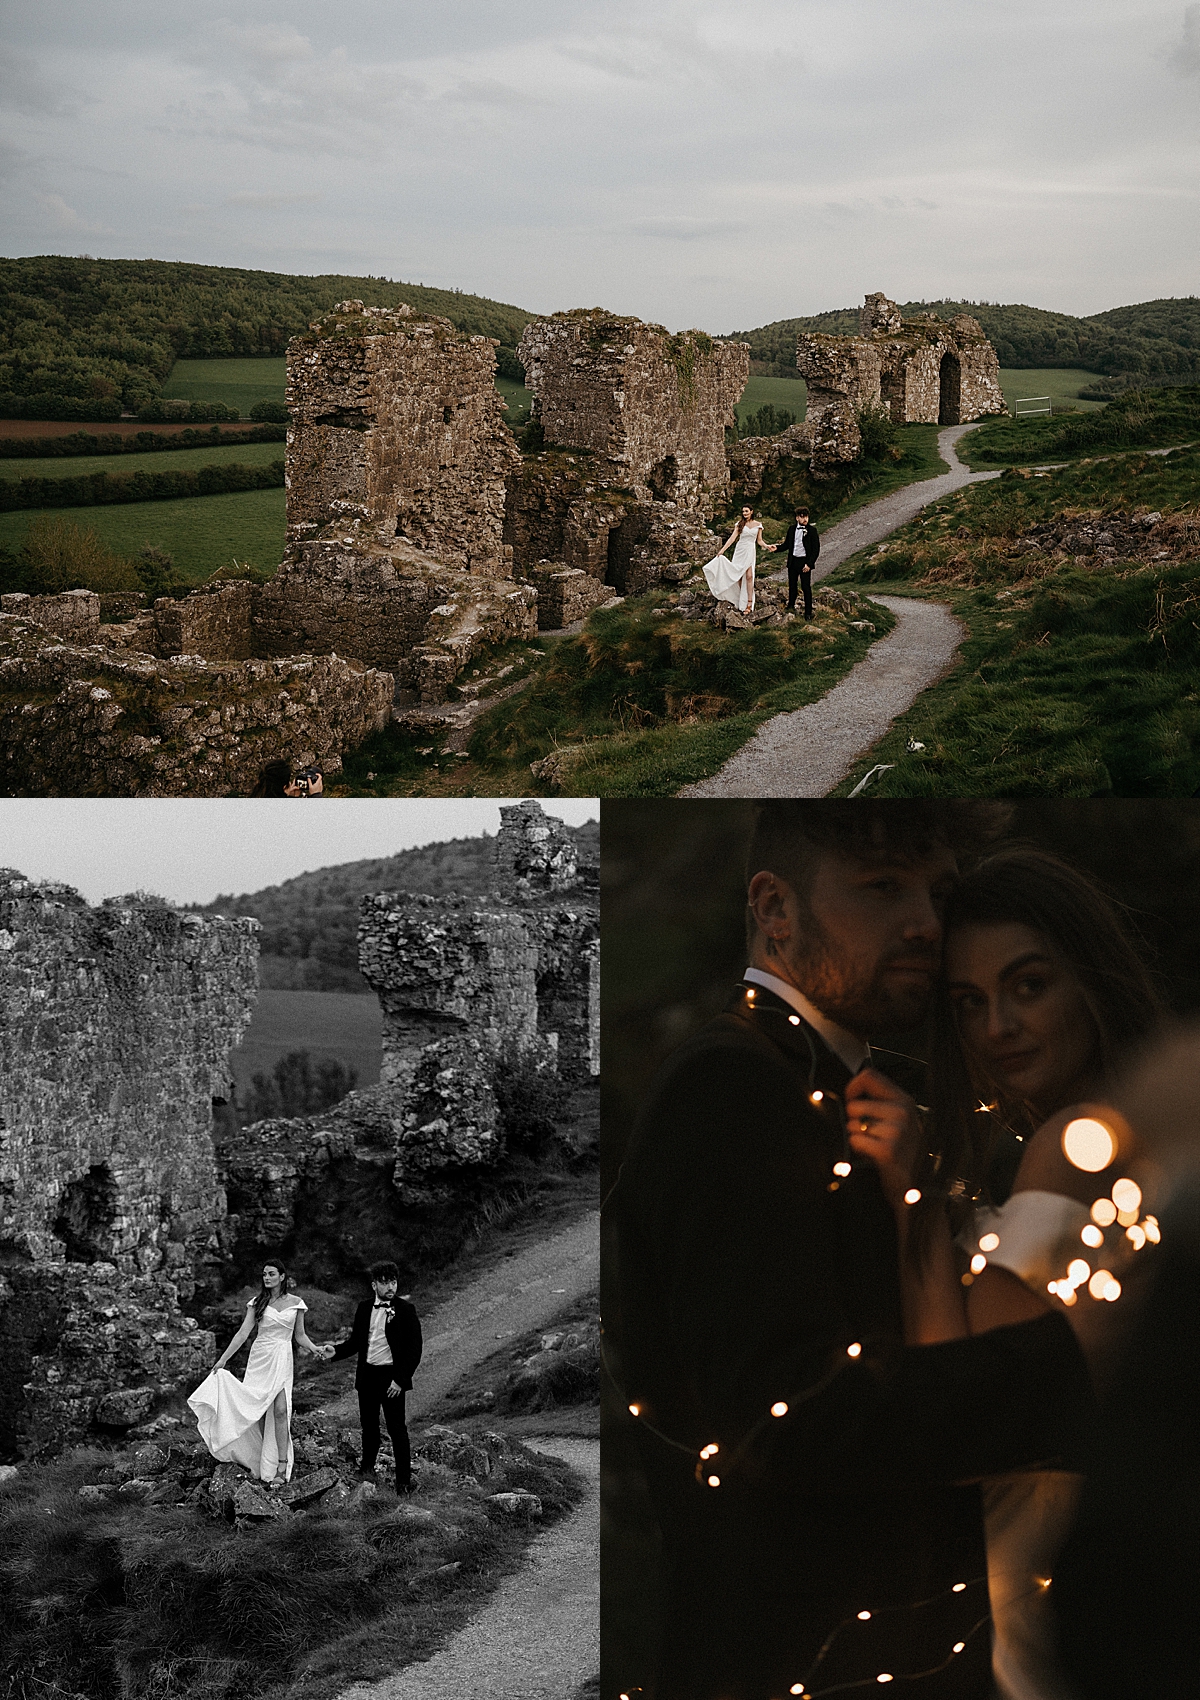 newly married couple holding hands at the castle ruins after the sun goes down by Emily burns photo